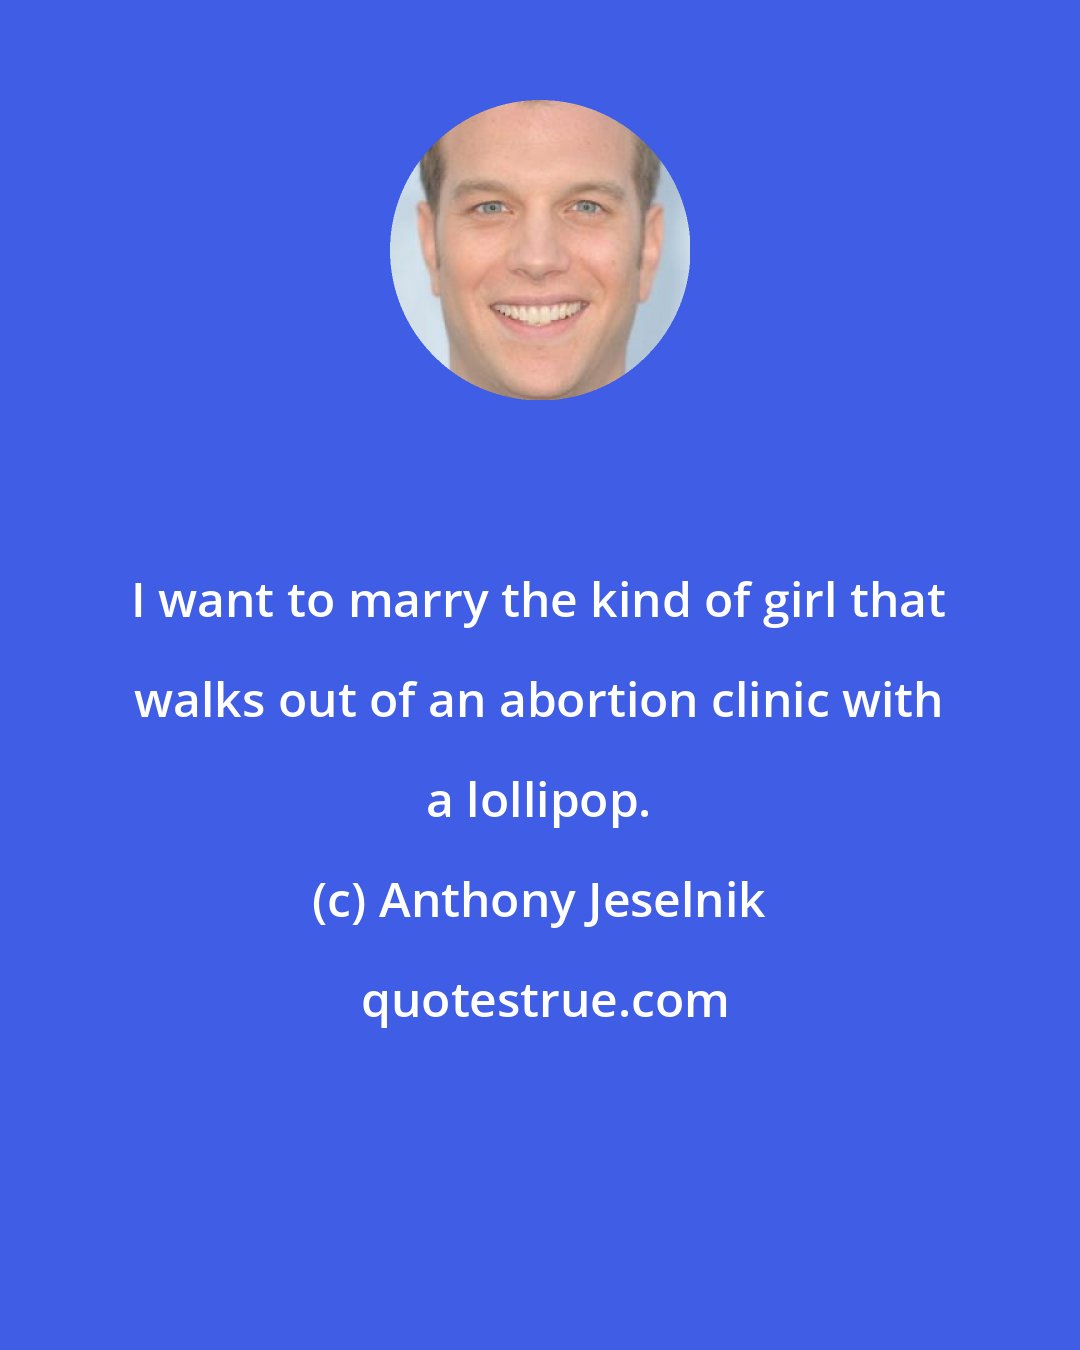 Anthony Jeselnik: I want to marry the kind of girl that walks out of an abortion clinic with a lollipop.